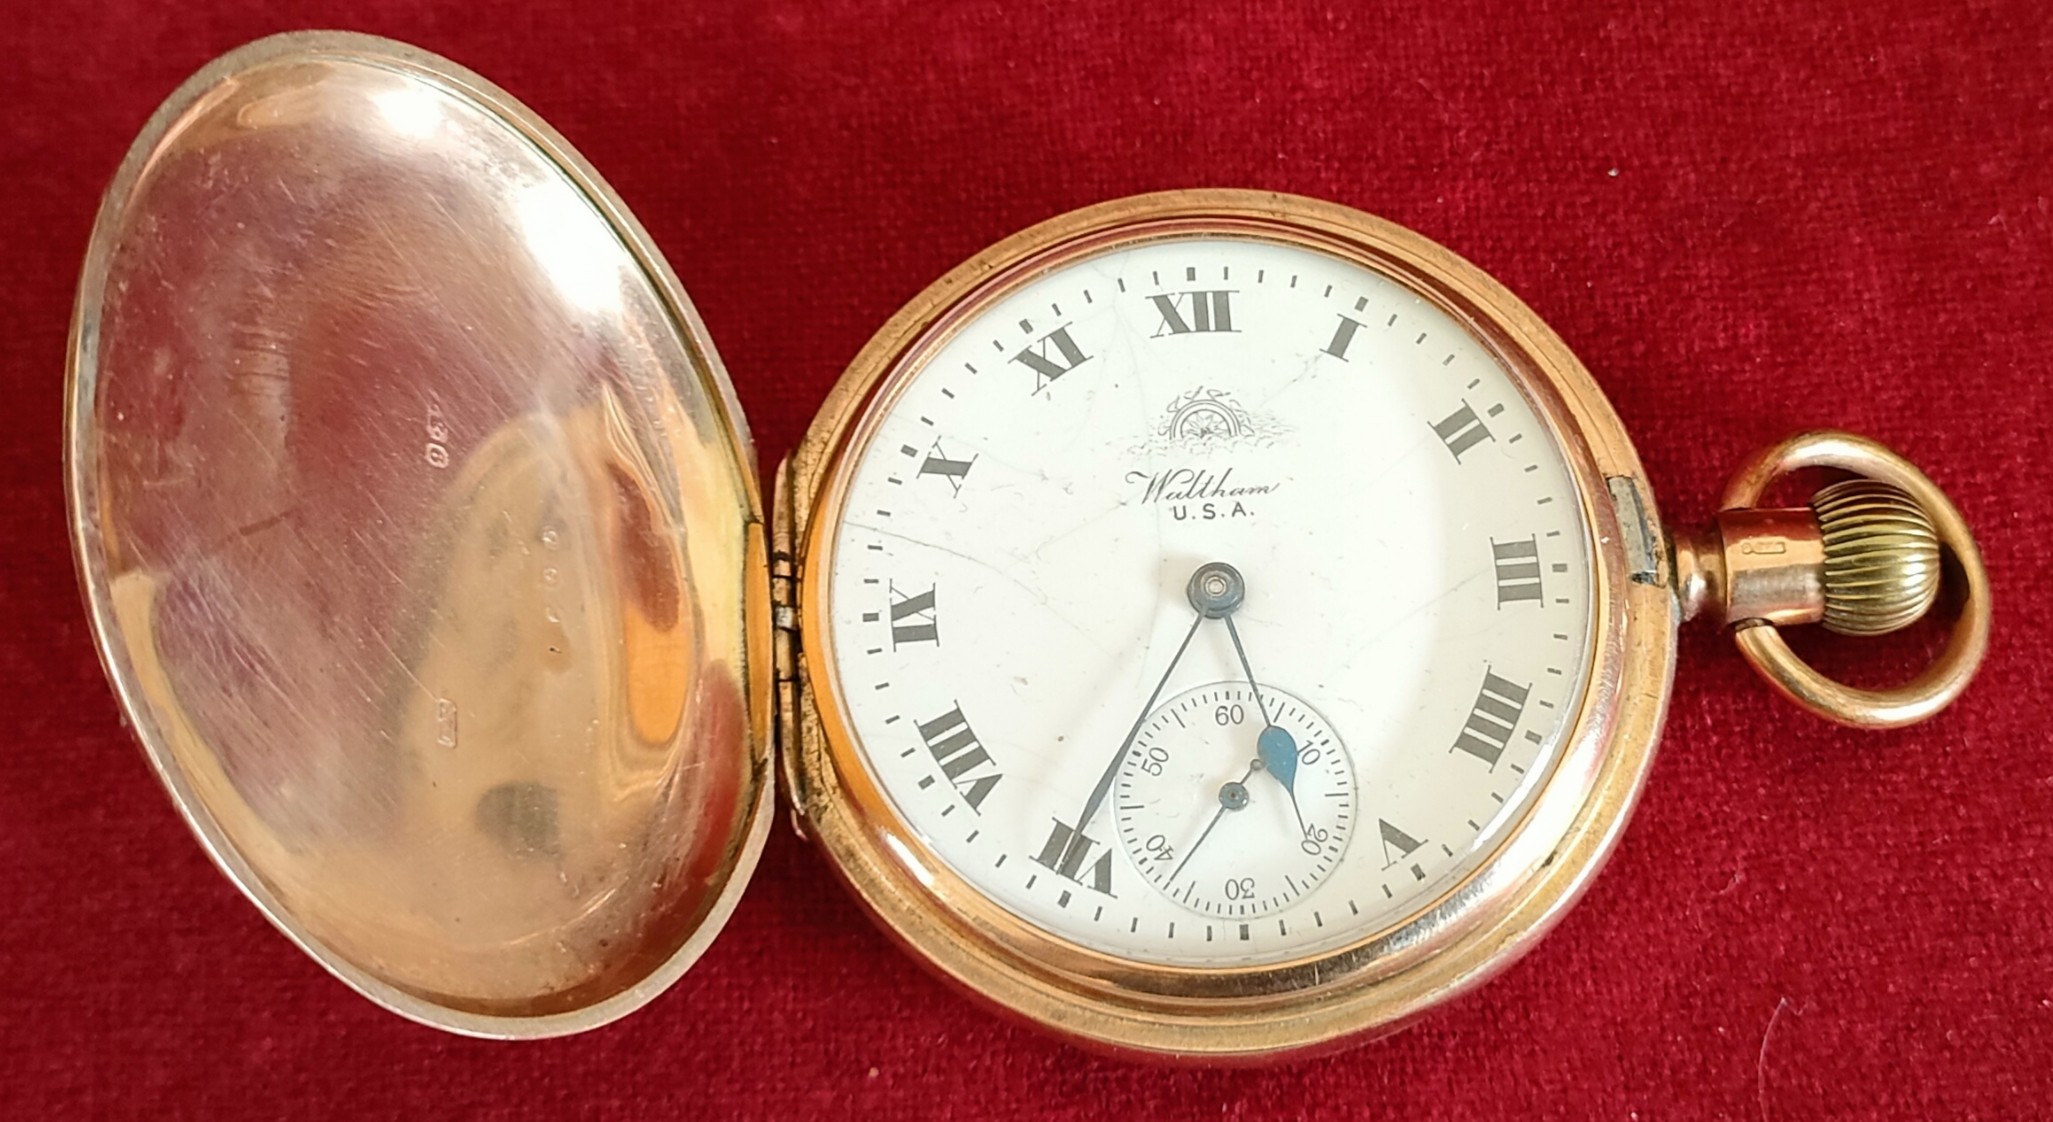 9CT GOLD WALTHAM POCKET WATCH USED CONDITION, INNER GLASS IS LOOSE AND WILL NEED REATTACHING, NOT